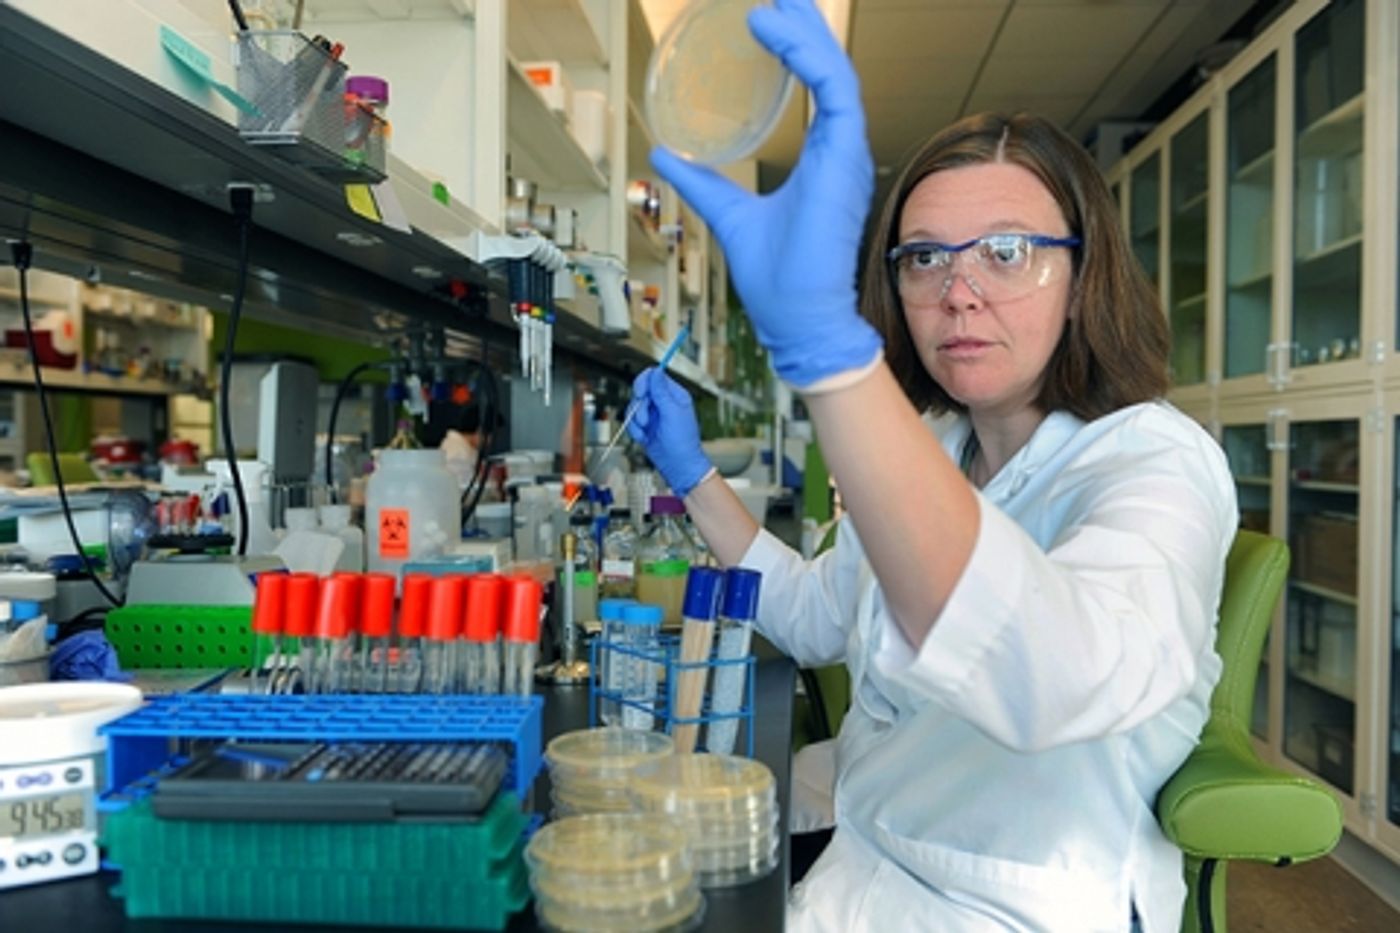 Microbiologist Dr. Elizabeth Shank inspects growing bacterial colonies.